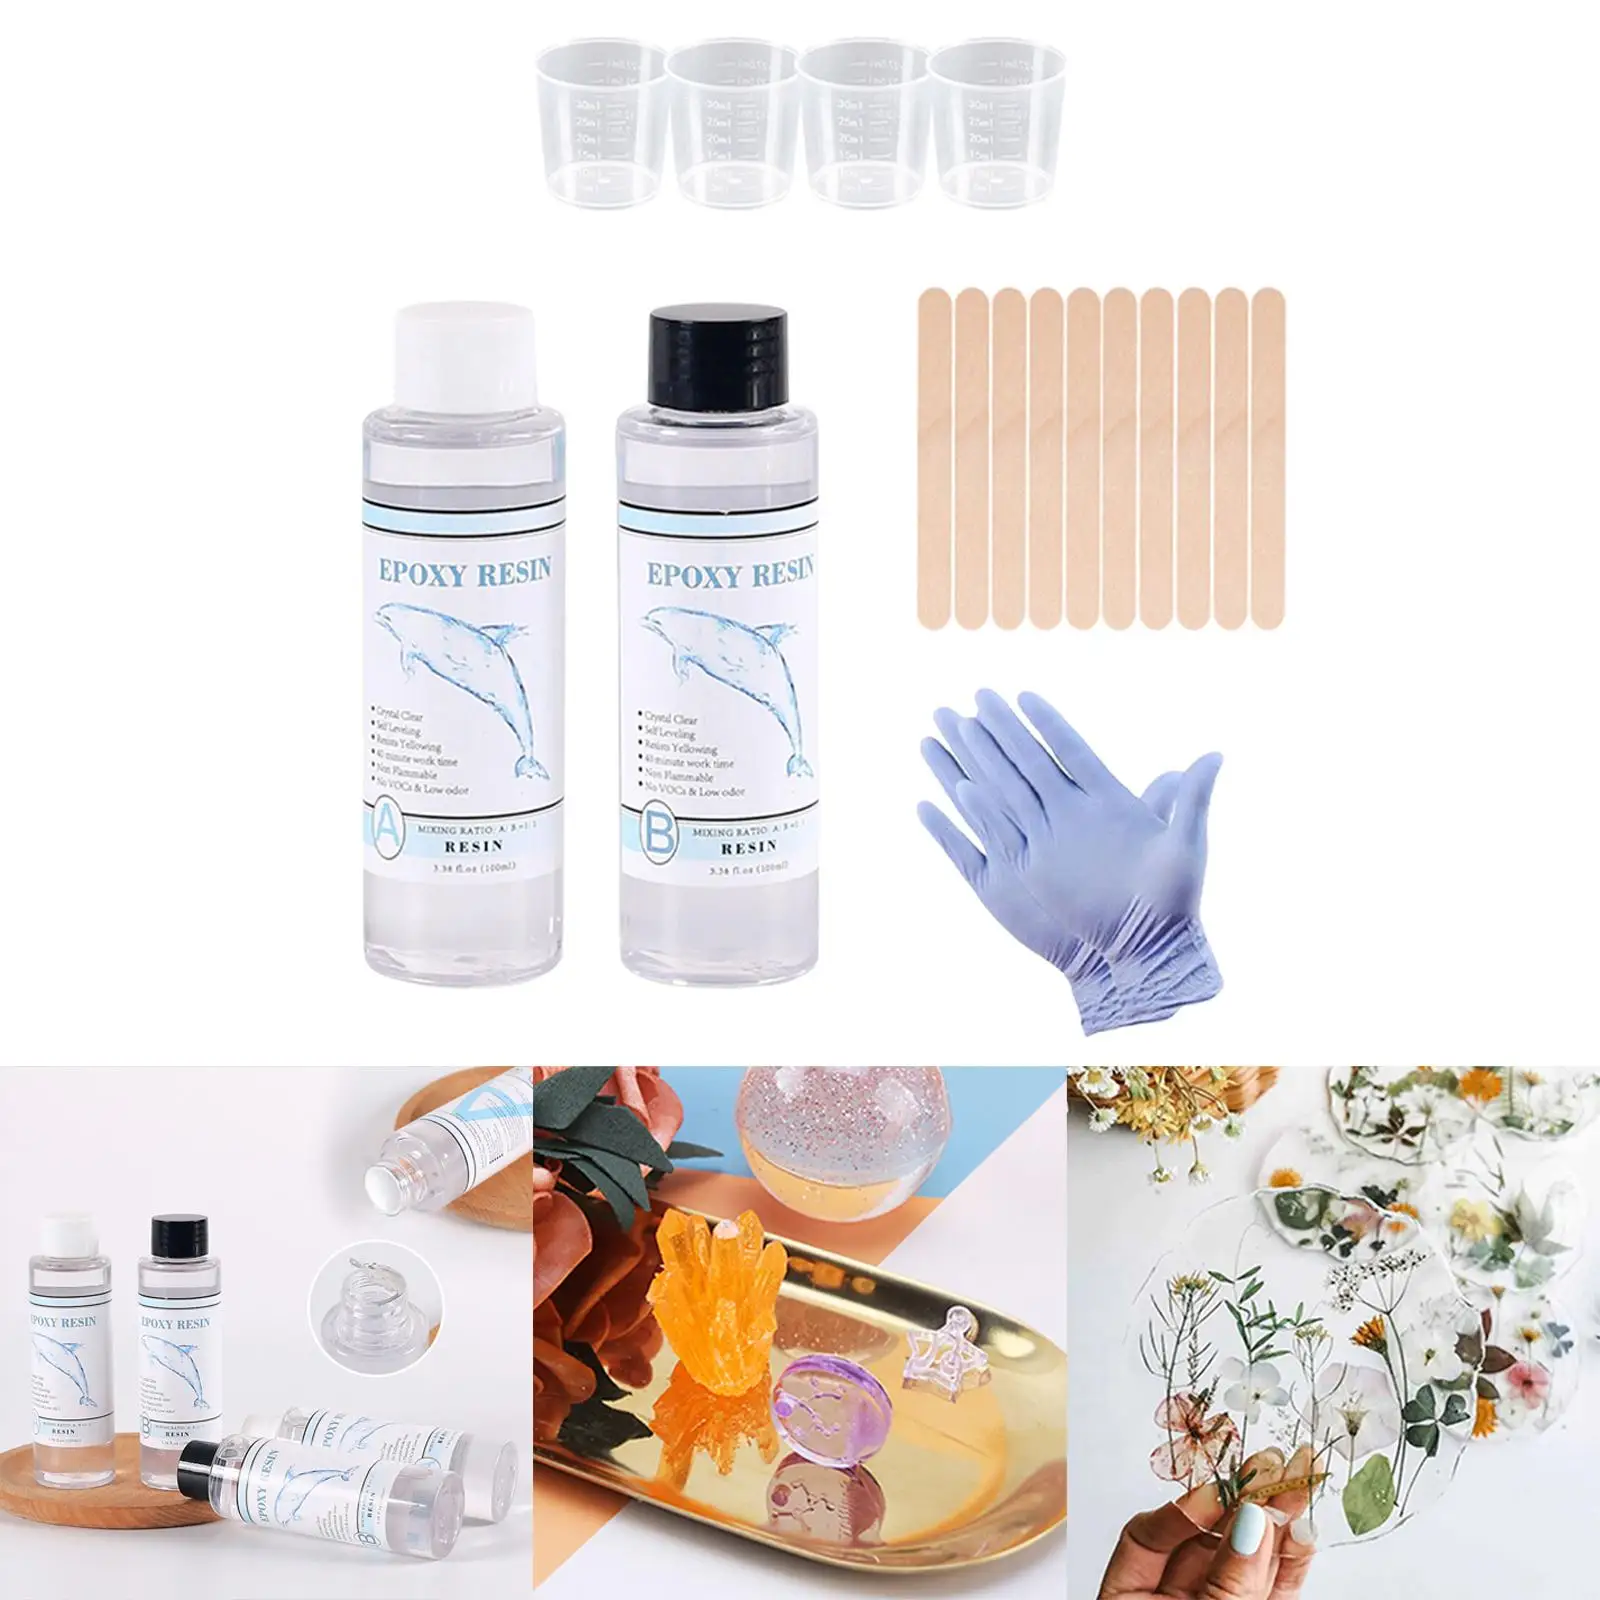 Epoxy Resin Clear Crystal Coating Kit with Gloves, Sticks for Jewelry Making